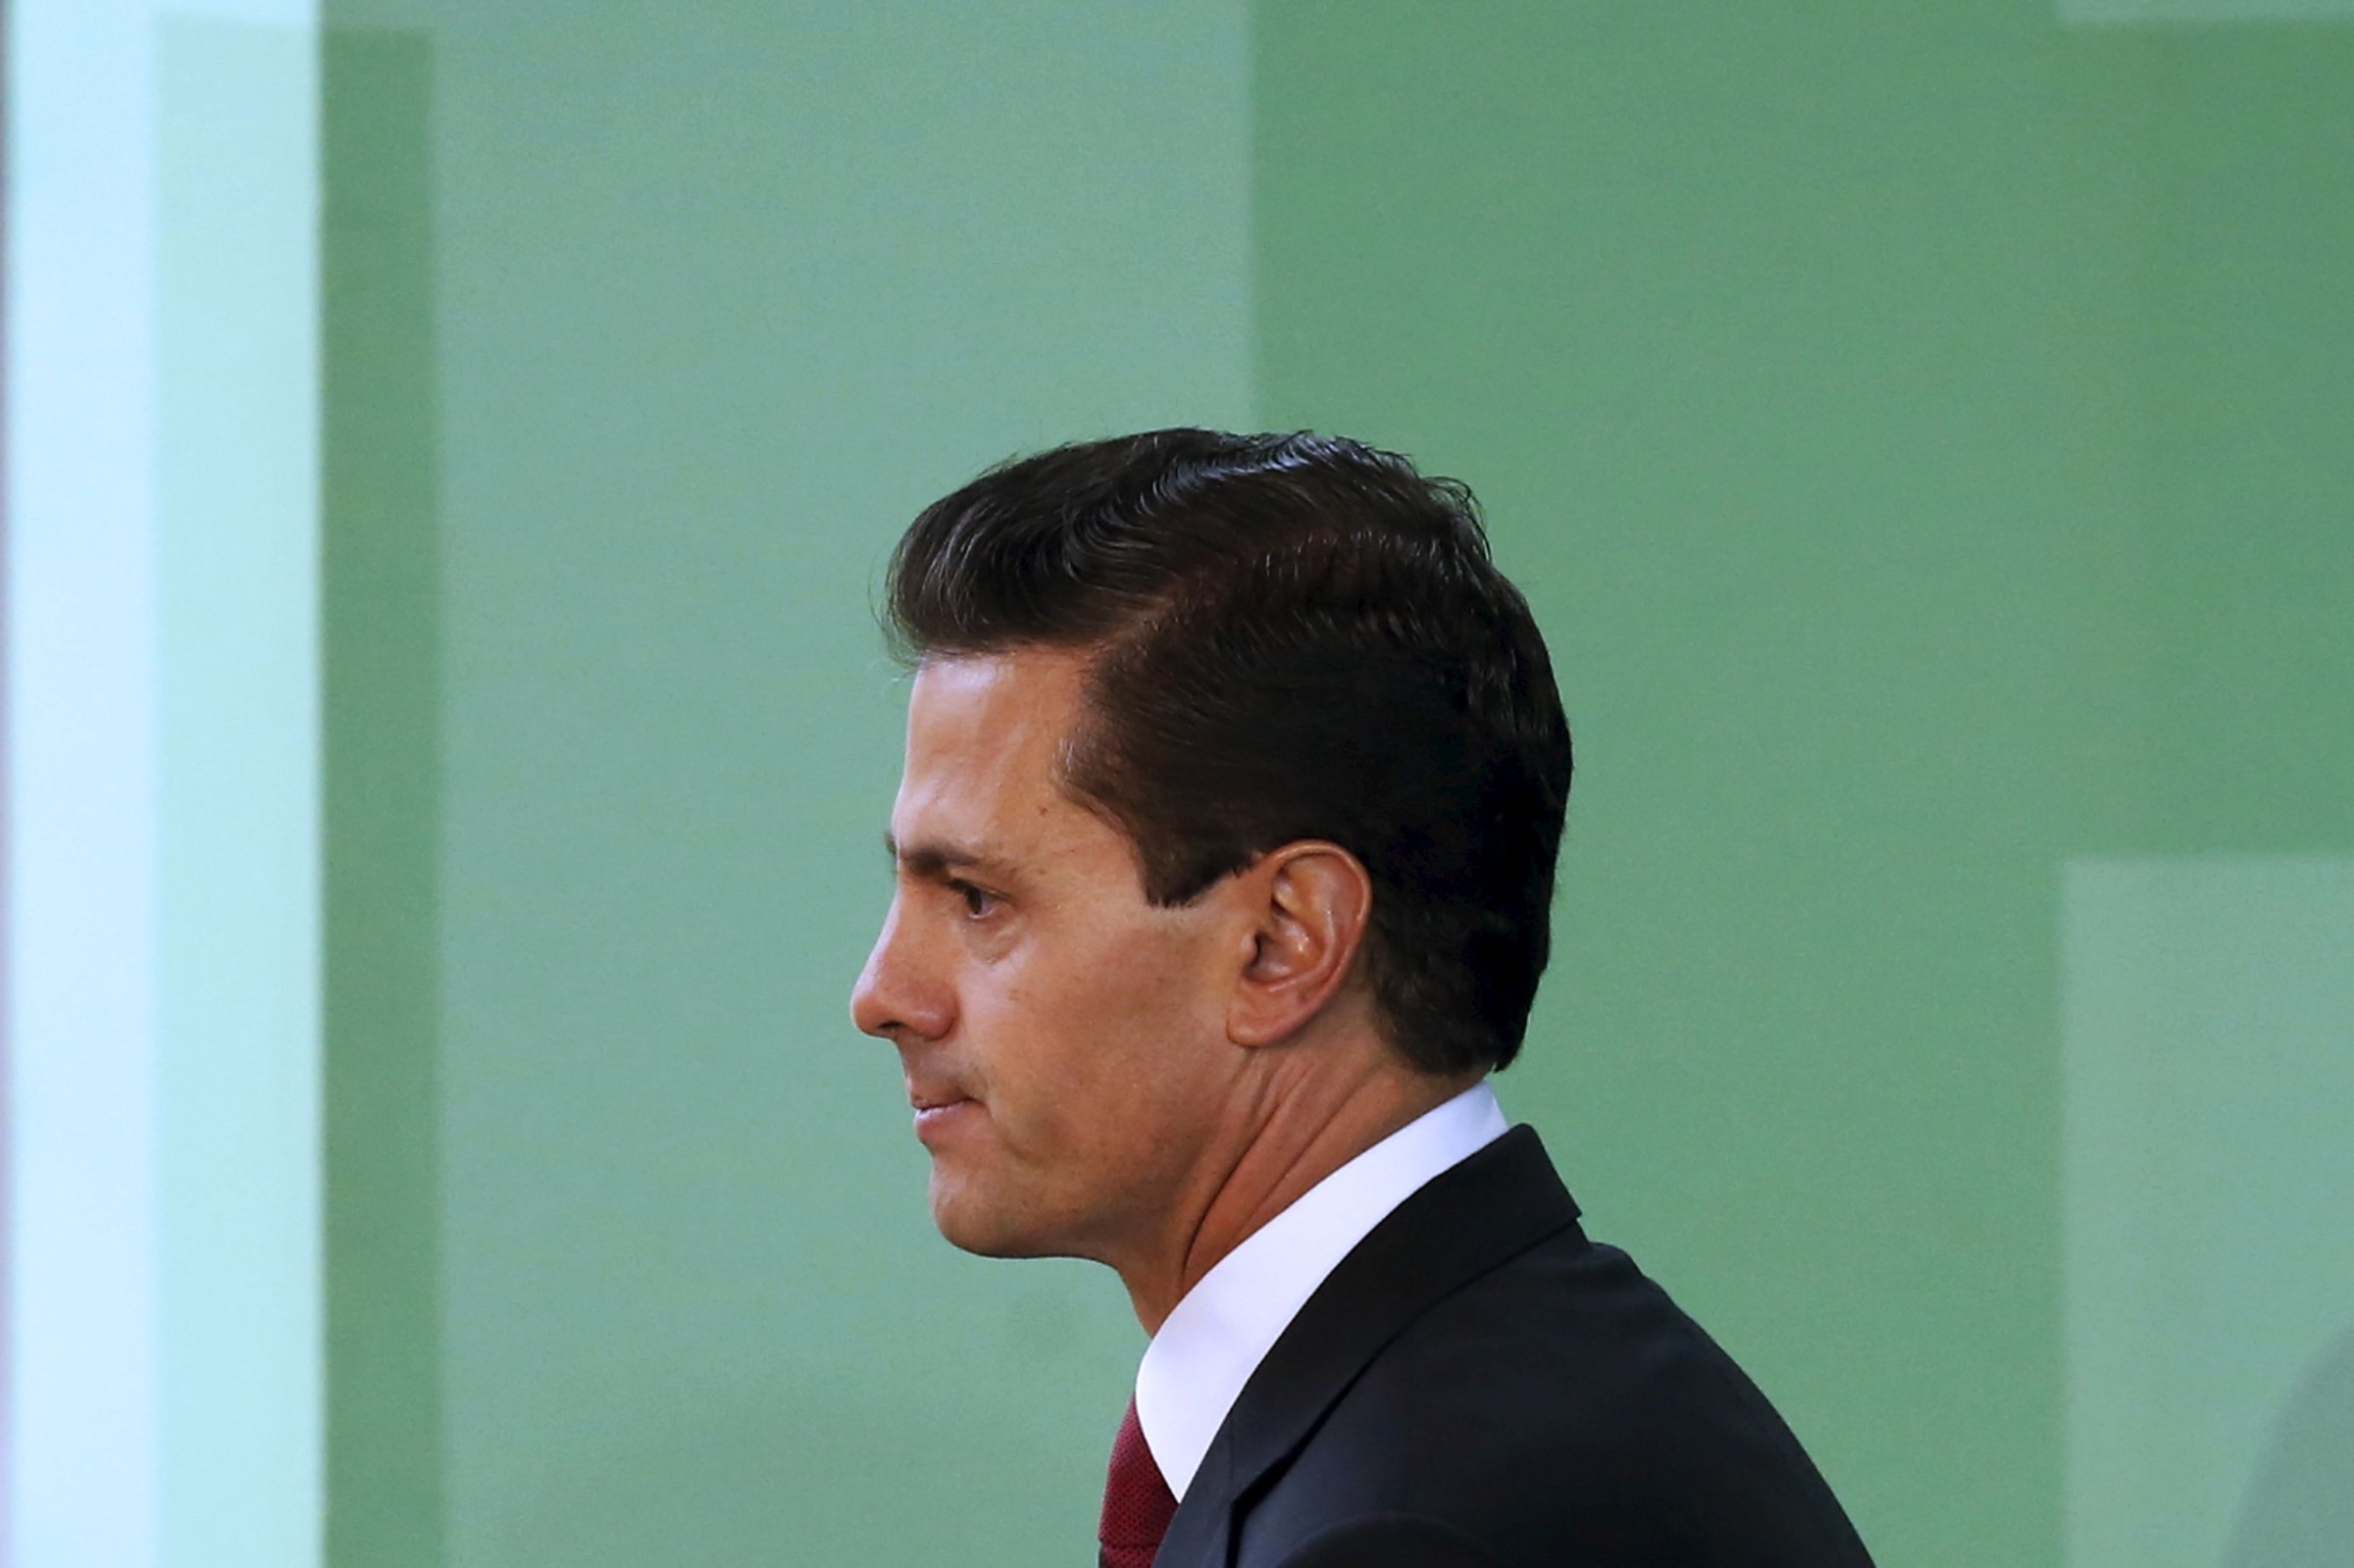 Mexico's President Enrique Pena Nieto is seen during announcing the government plans to legalize marijuana-based medicines, and proposed raising the amount of the drug that can be legally carried, in the wake of a national drug policy review, in Mexico City, Mexico, April 21, 2016. REUTERS/Edgard Garrido - RTX2B3KR